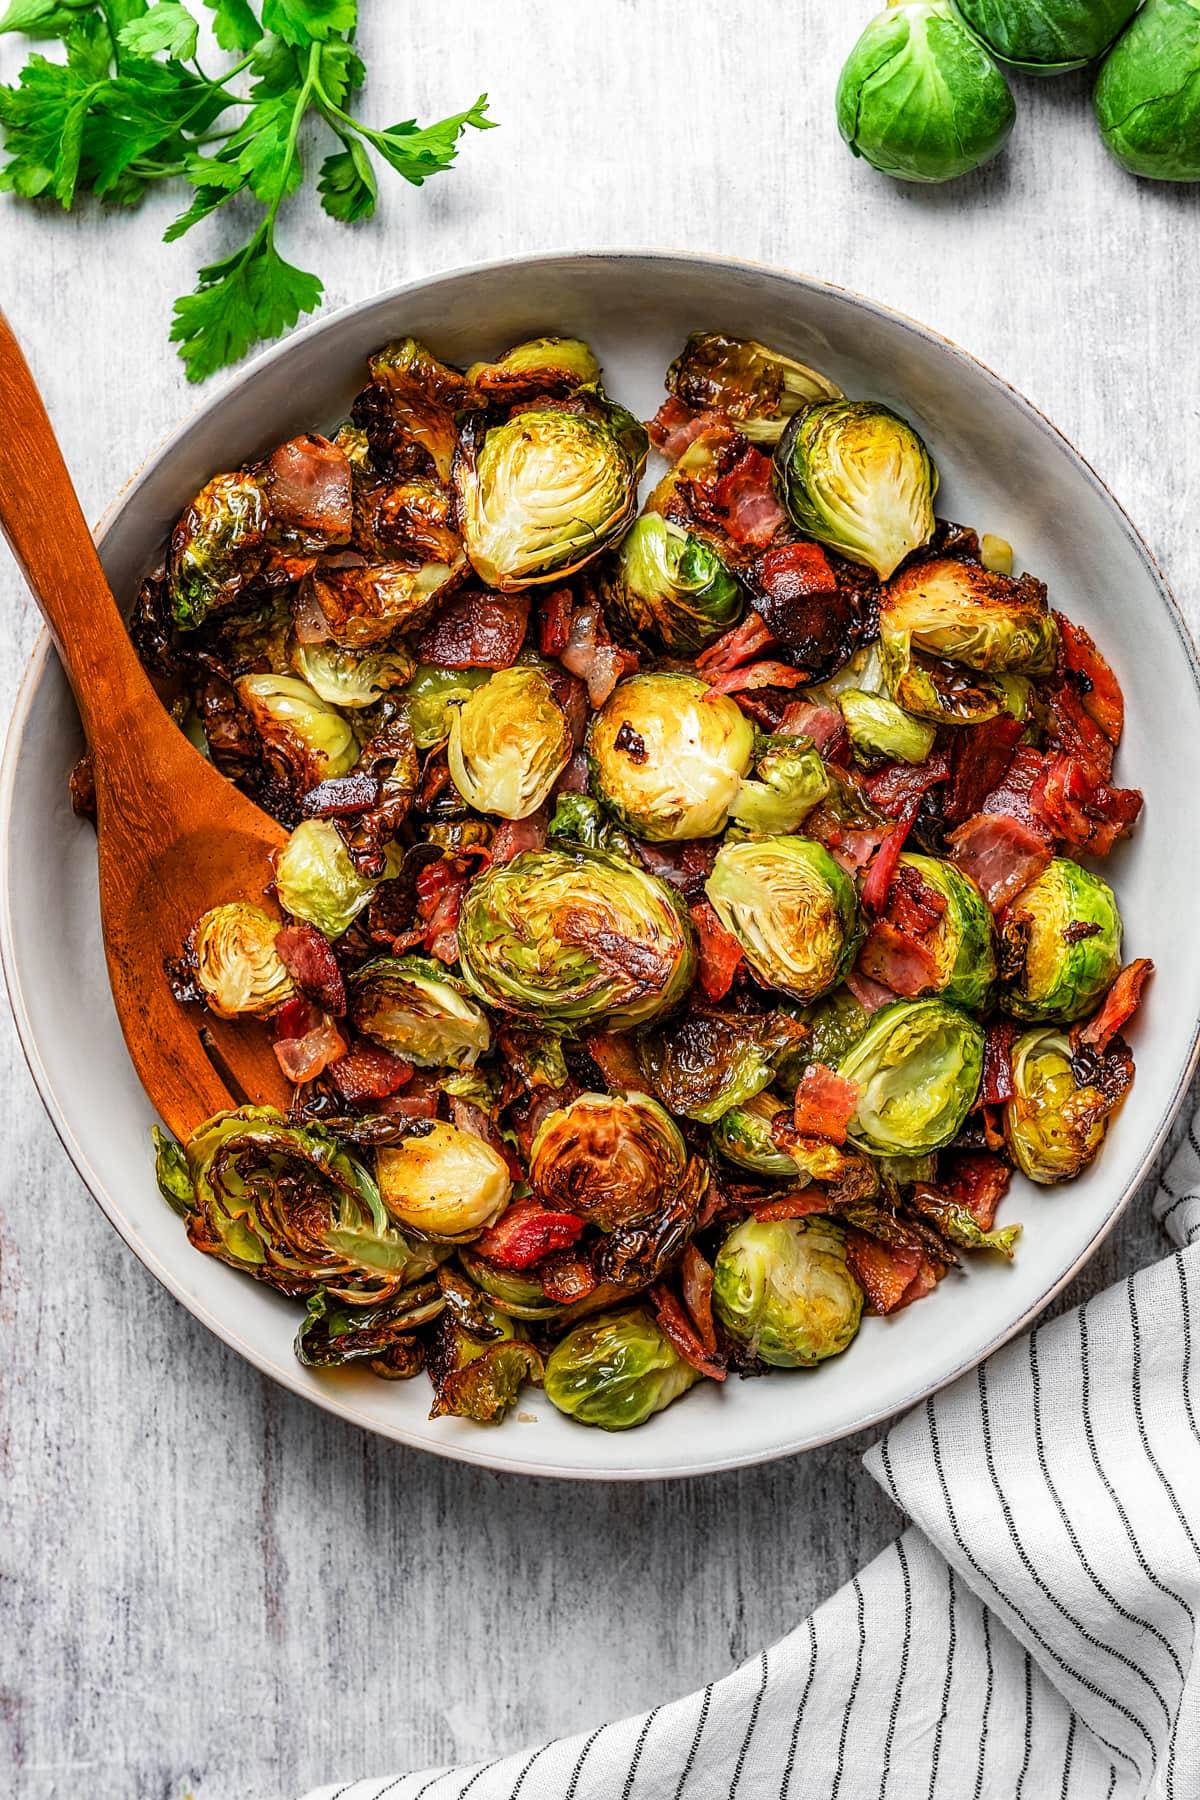 Roasted Brussels sprouts and bacon in a serving bowl with a wooden serving fork.